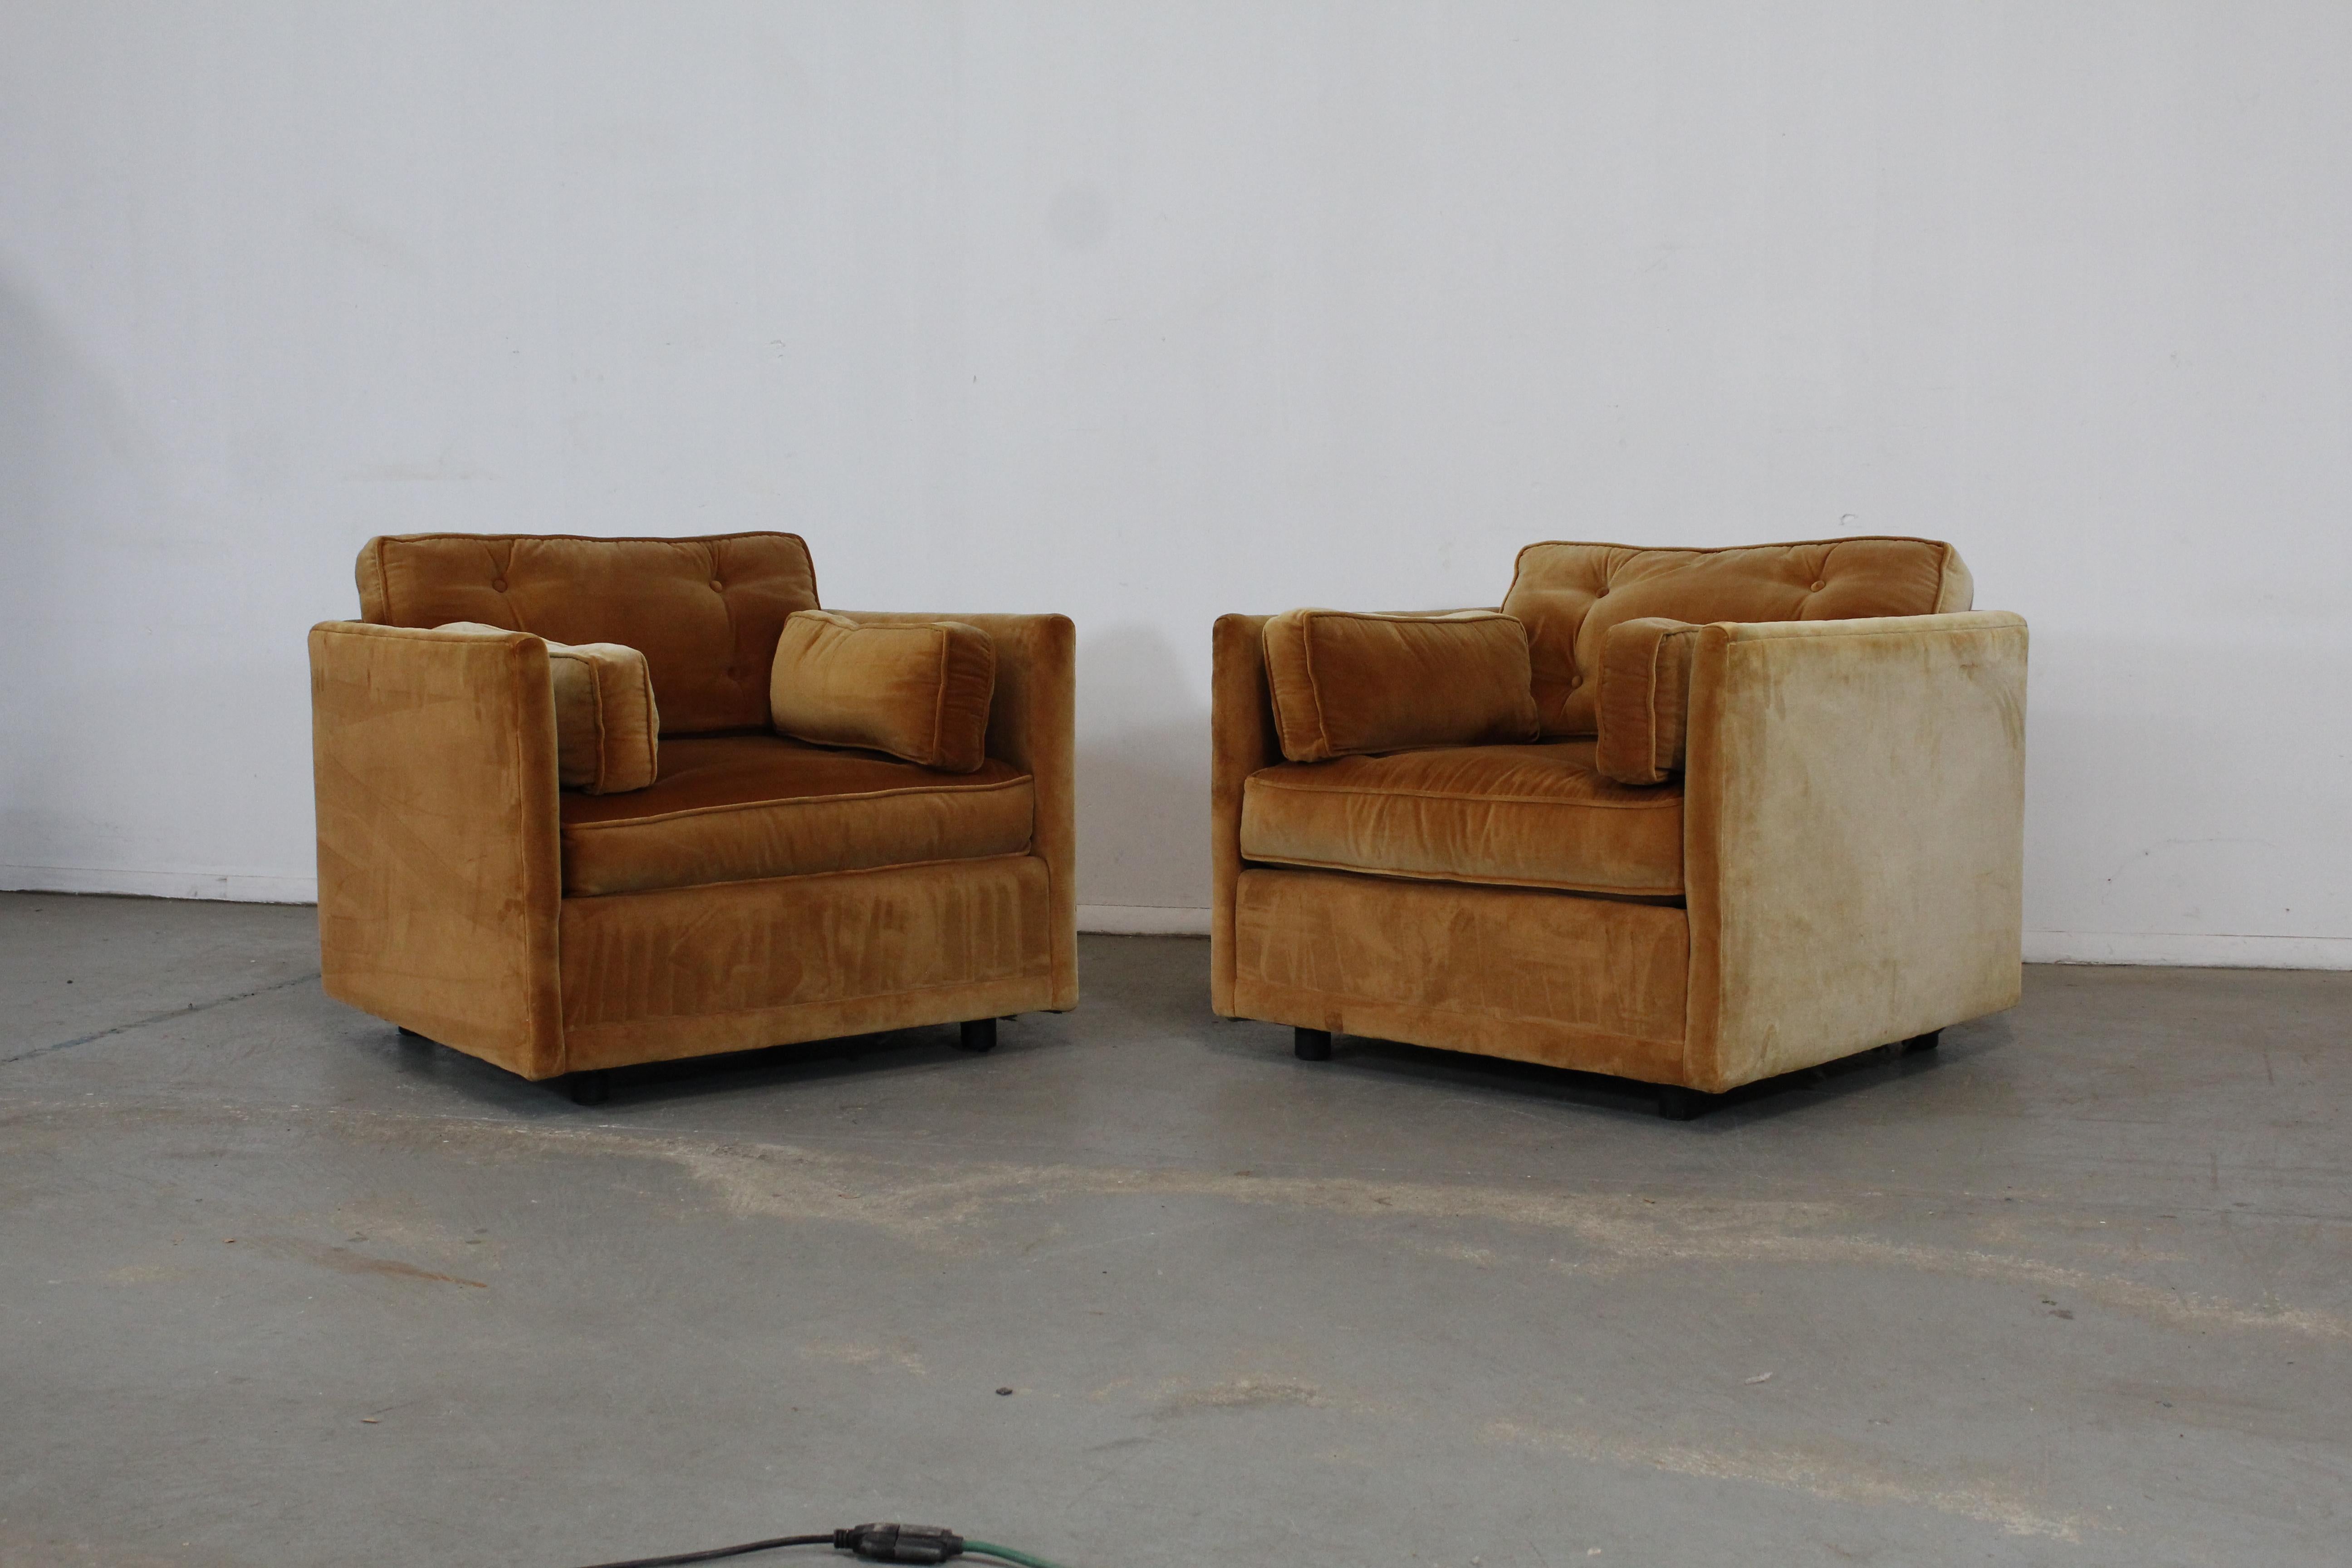 Pair of vintage Mid-Century Modern Milo Baughman velvet cube/club chairs by Directional

 Offered is a Pair of Vintage Mid-Century Modern Milo Baughman velvet cube/club chairs by Directional. These chairs were made in the early 1970's. They are in